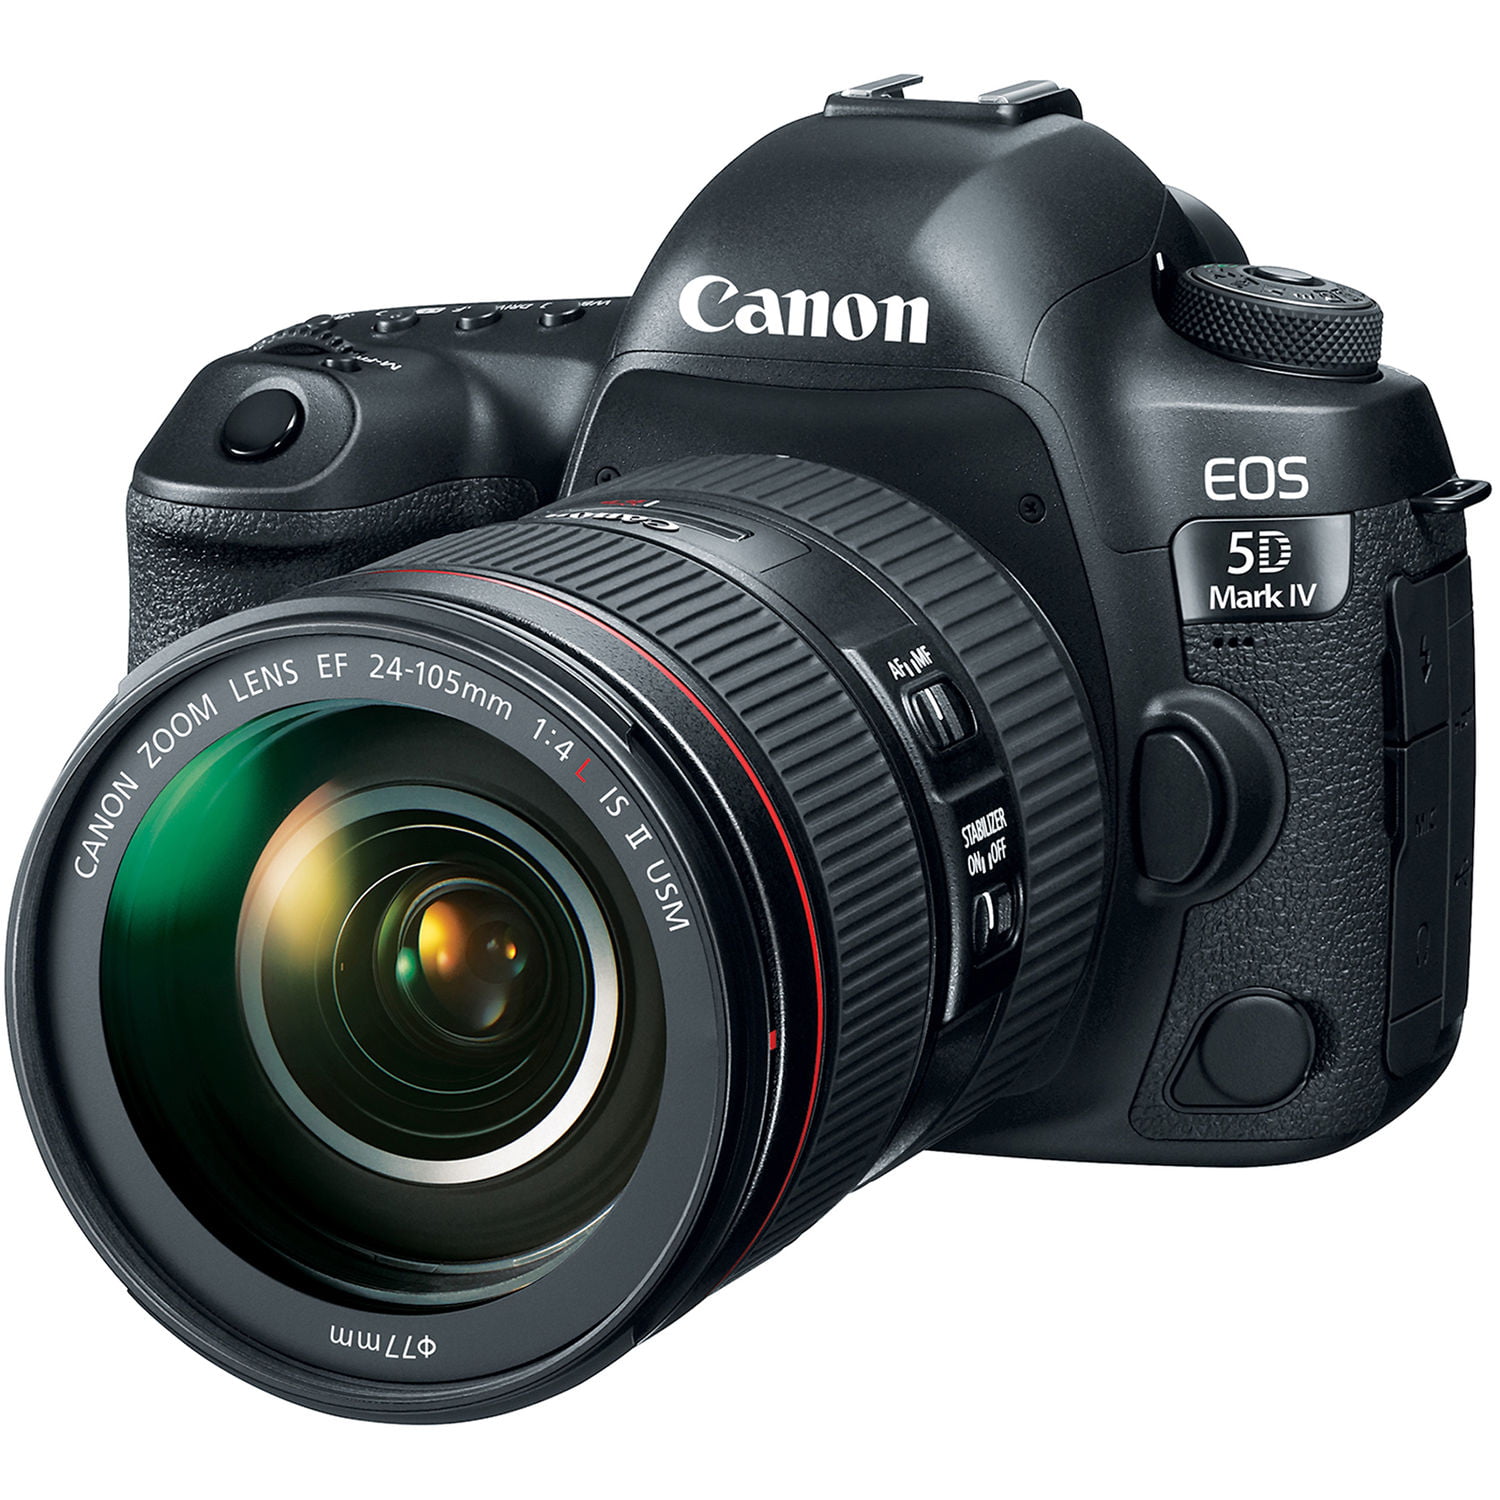 Canon EOS 5D Mark IV DSLR Camera with 24-105mm F/4L II Lens - image 1 of 4